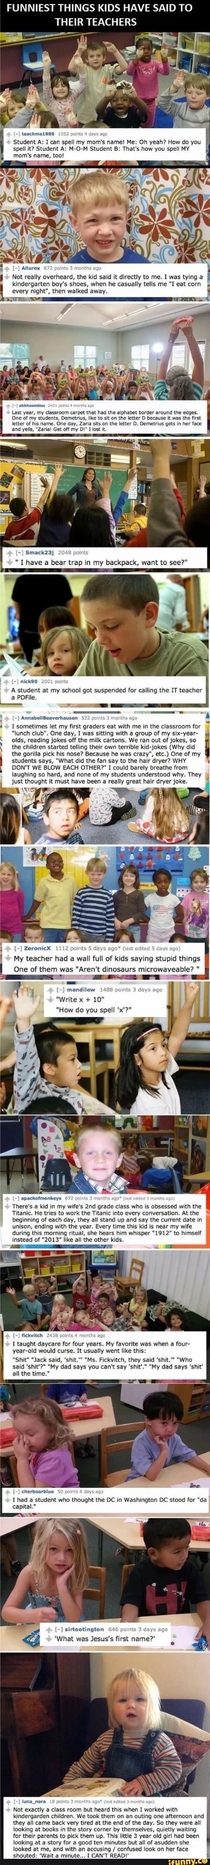 Funny things kids say